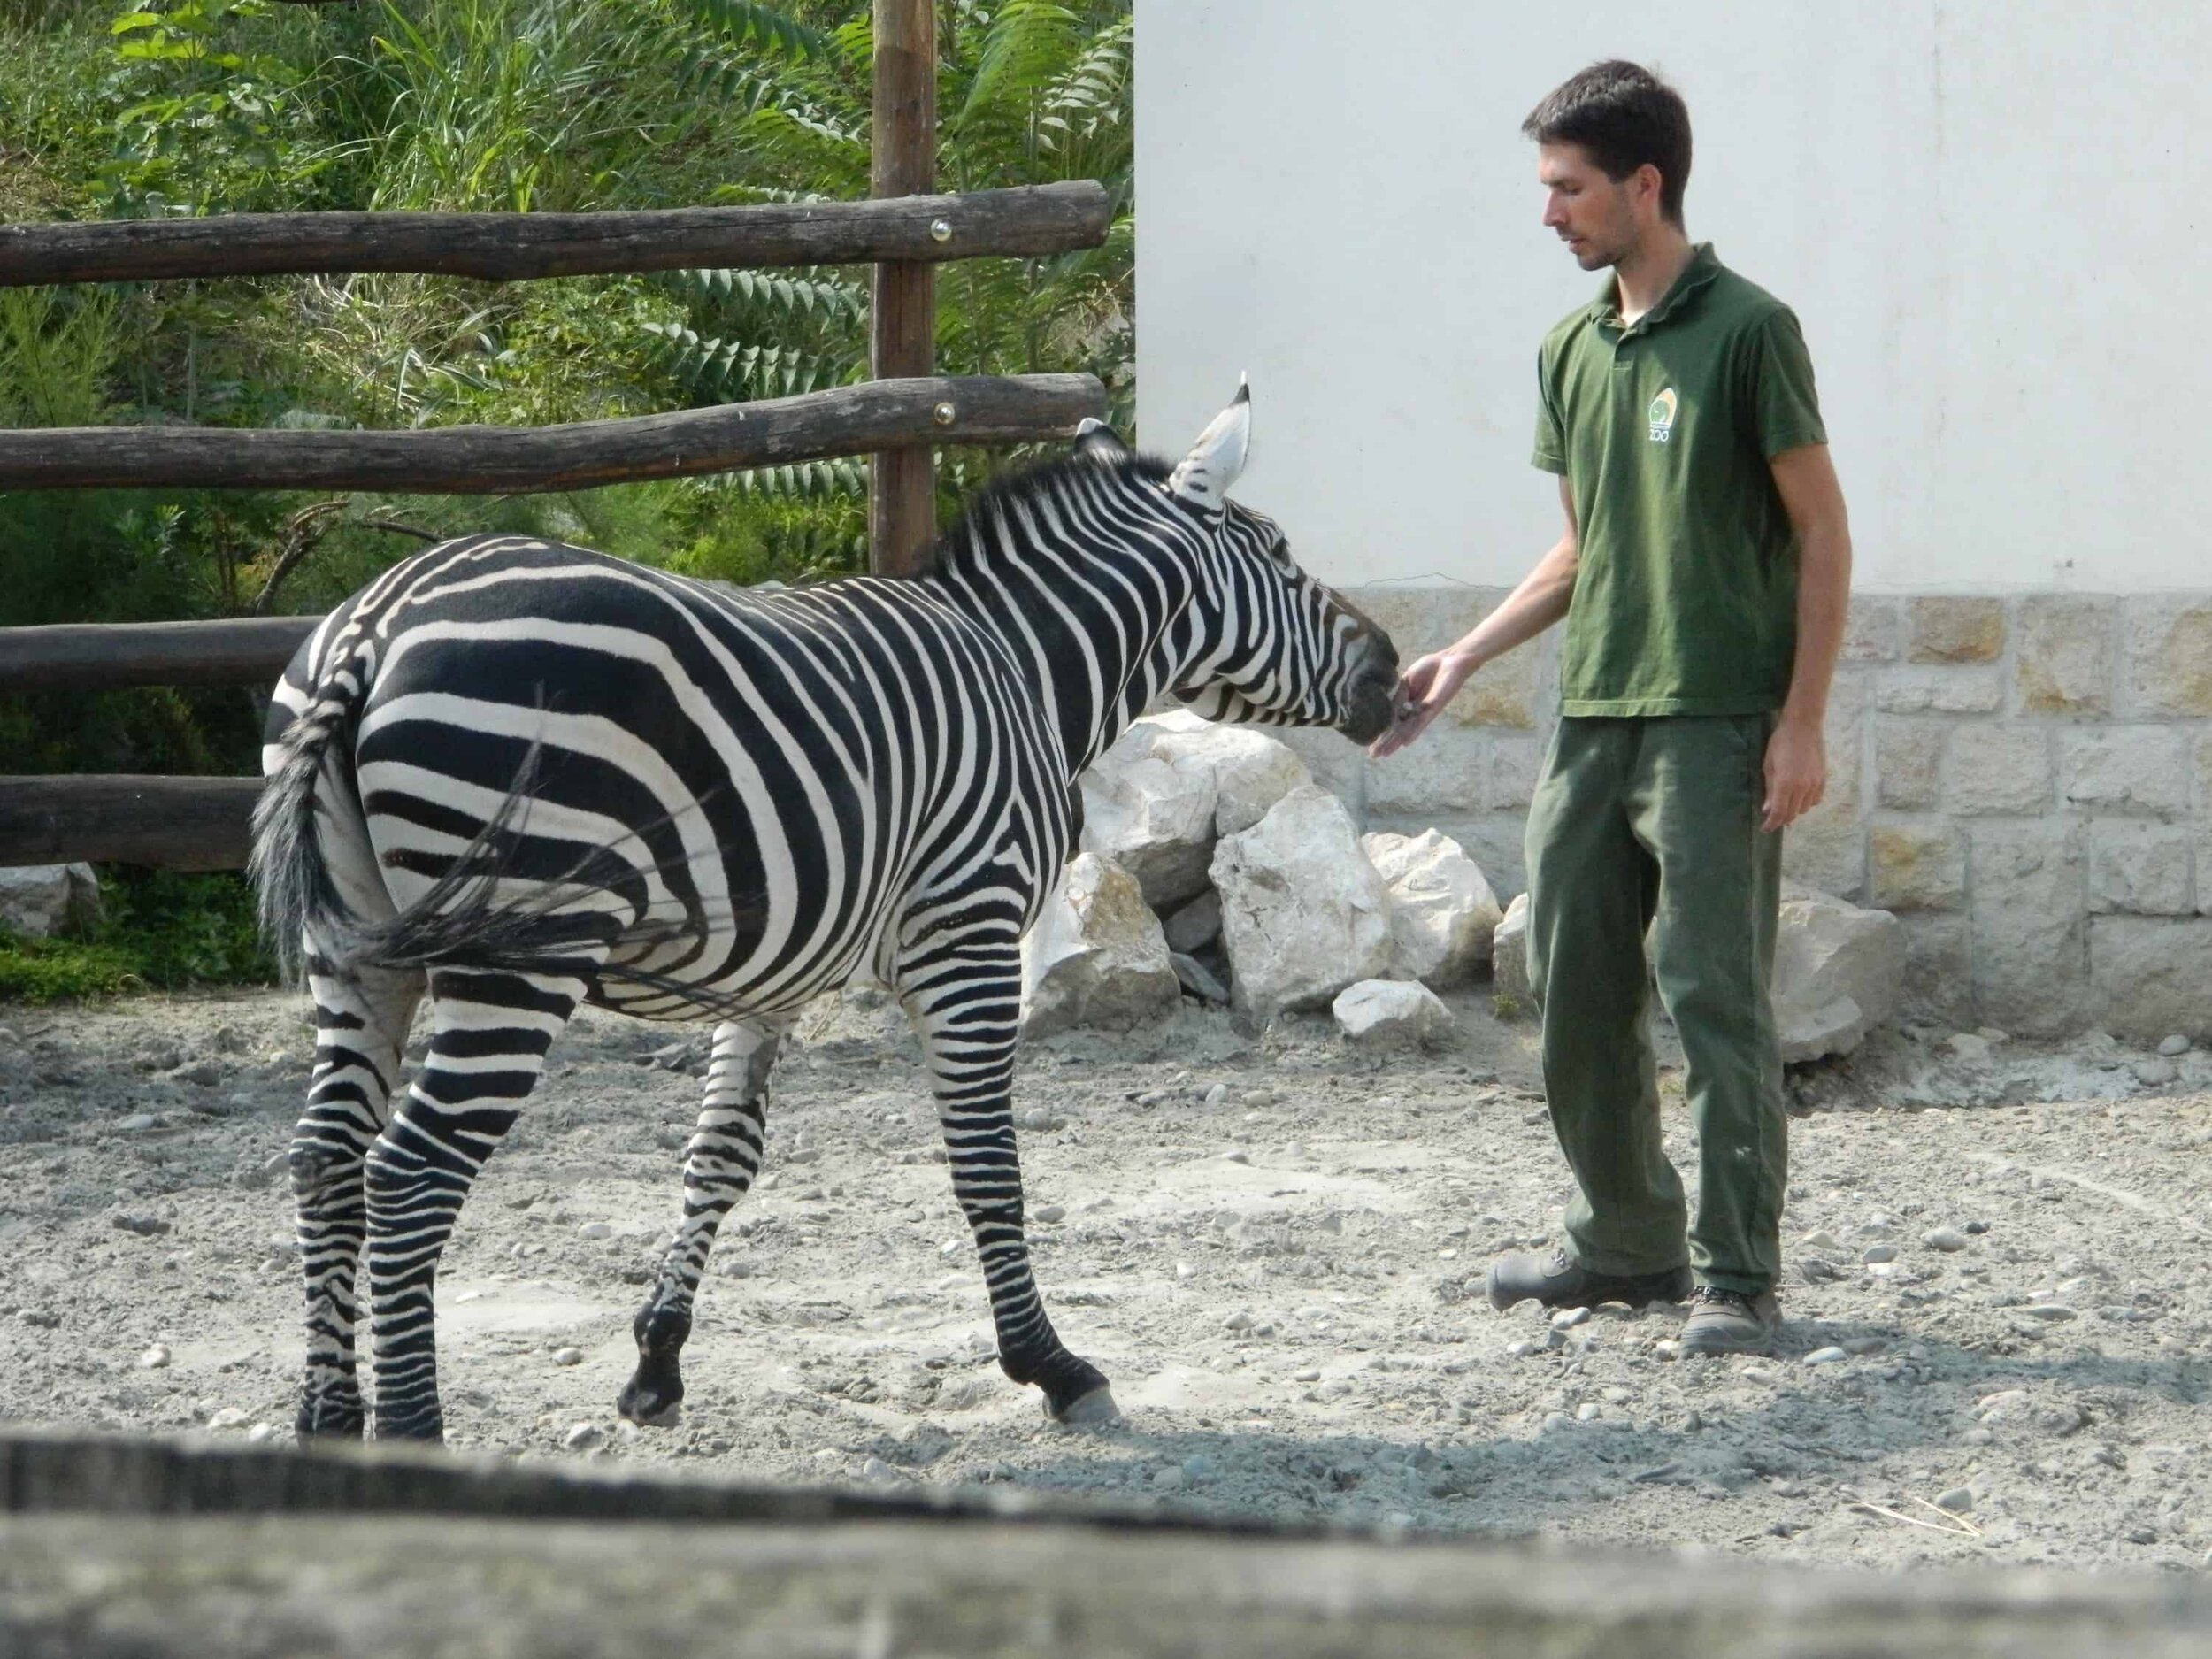 Feeding time for the zebra at Budapest Zoo